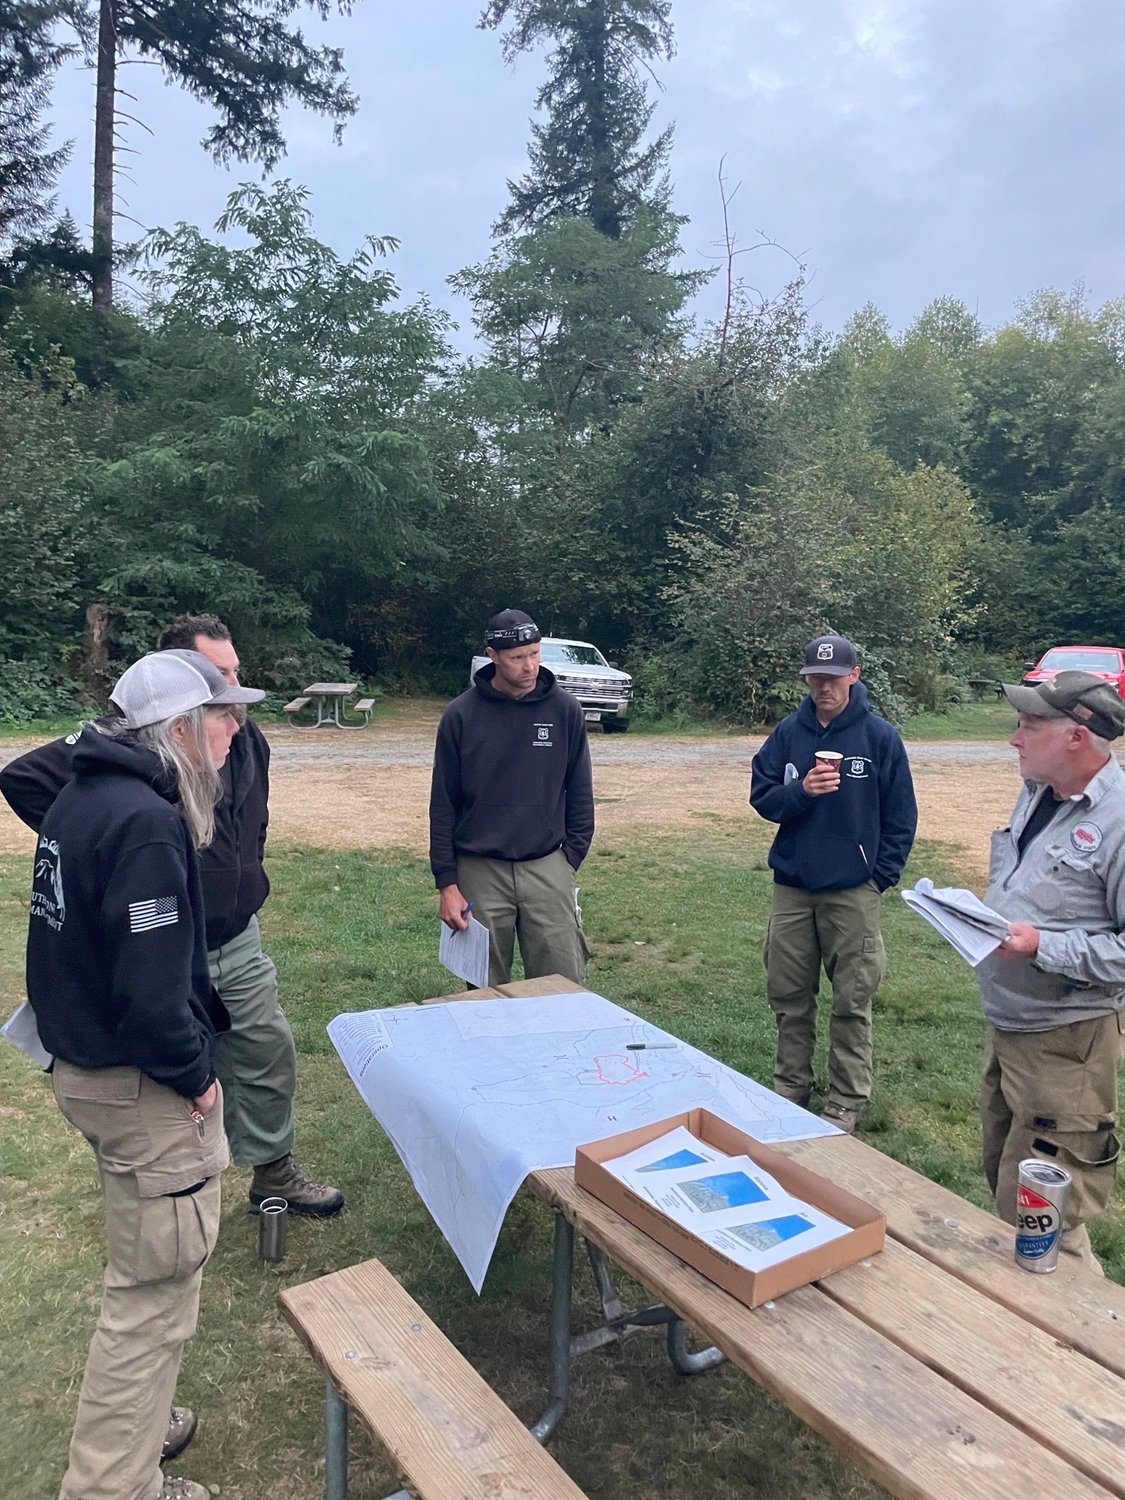 Firefighters working the Kalama fire in the Gifford Pinchot National Forest receive a briefing on Sept. 14.